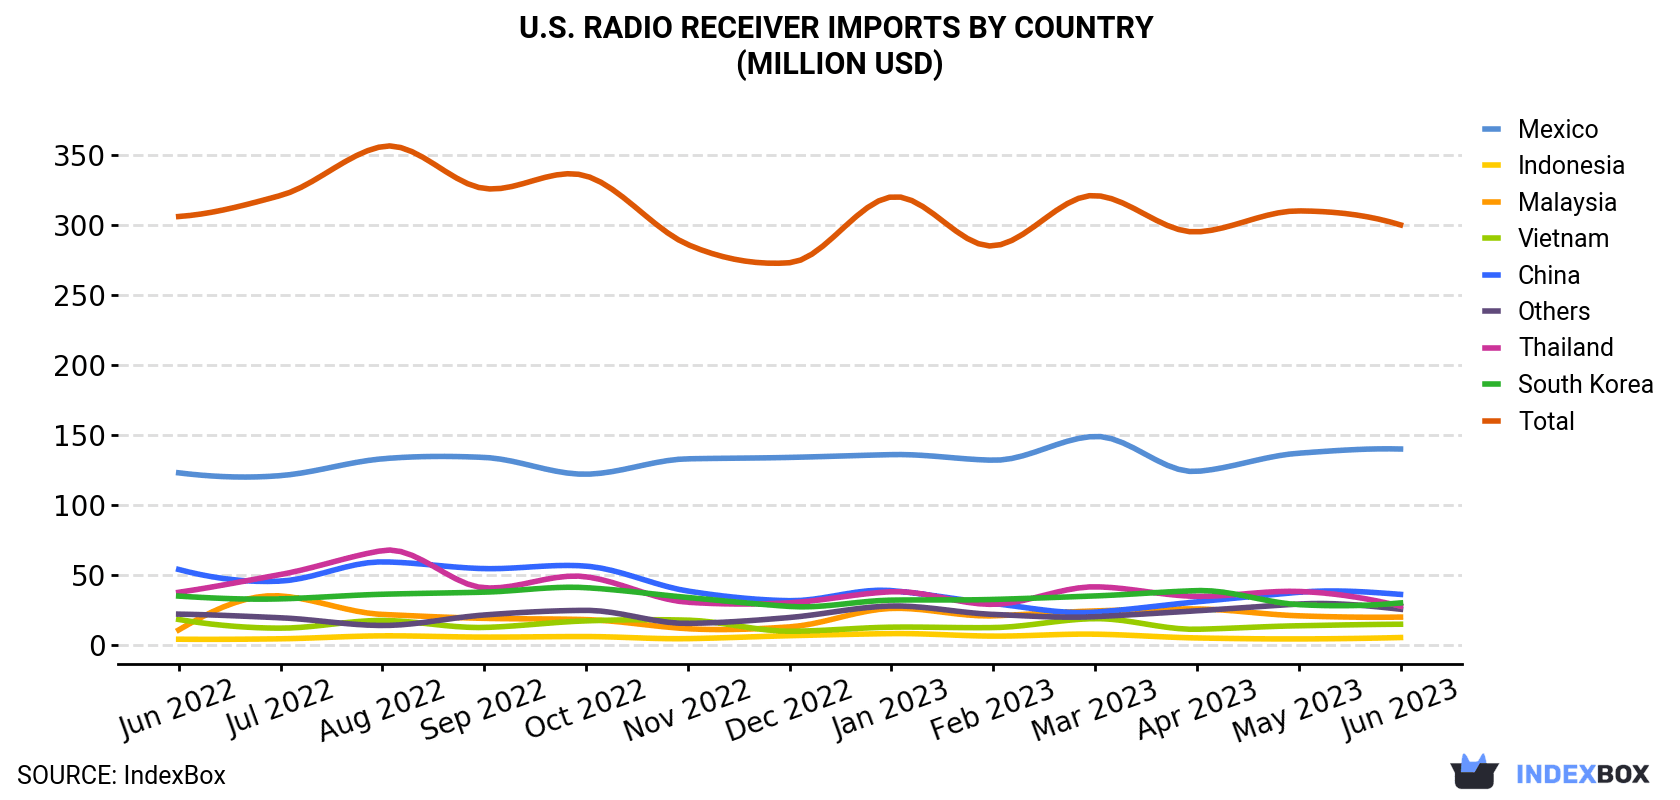 U.S. Radio Receiver Imports By Country (Million USD)